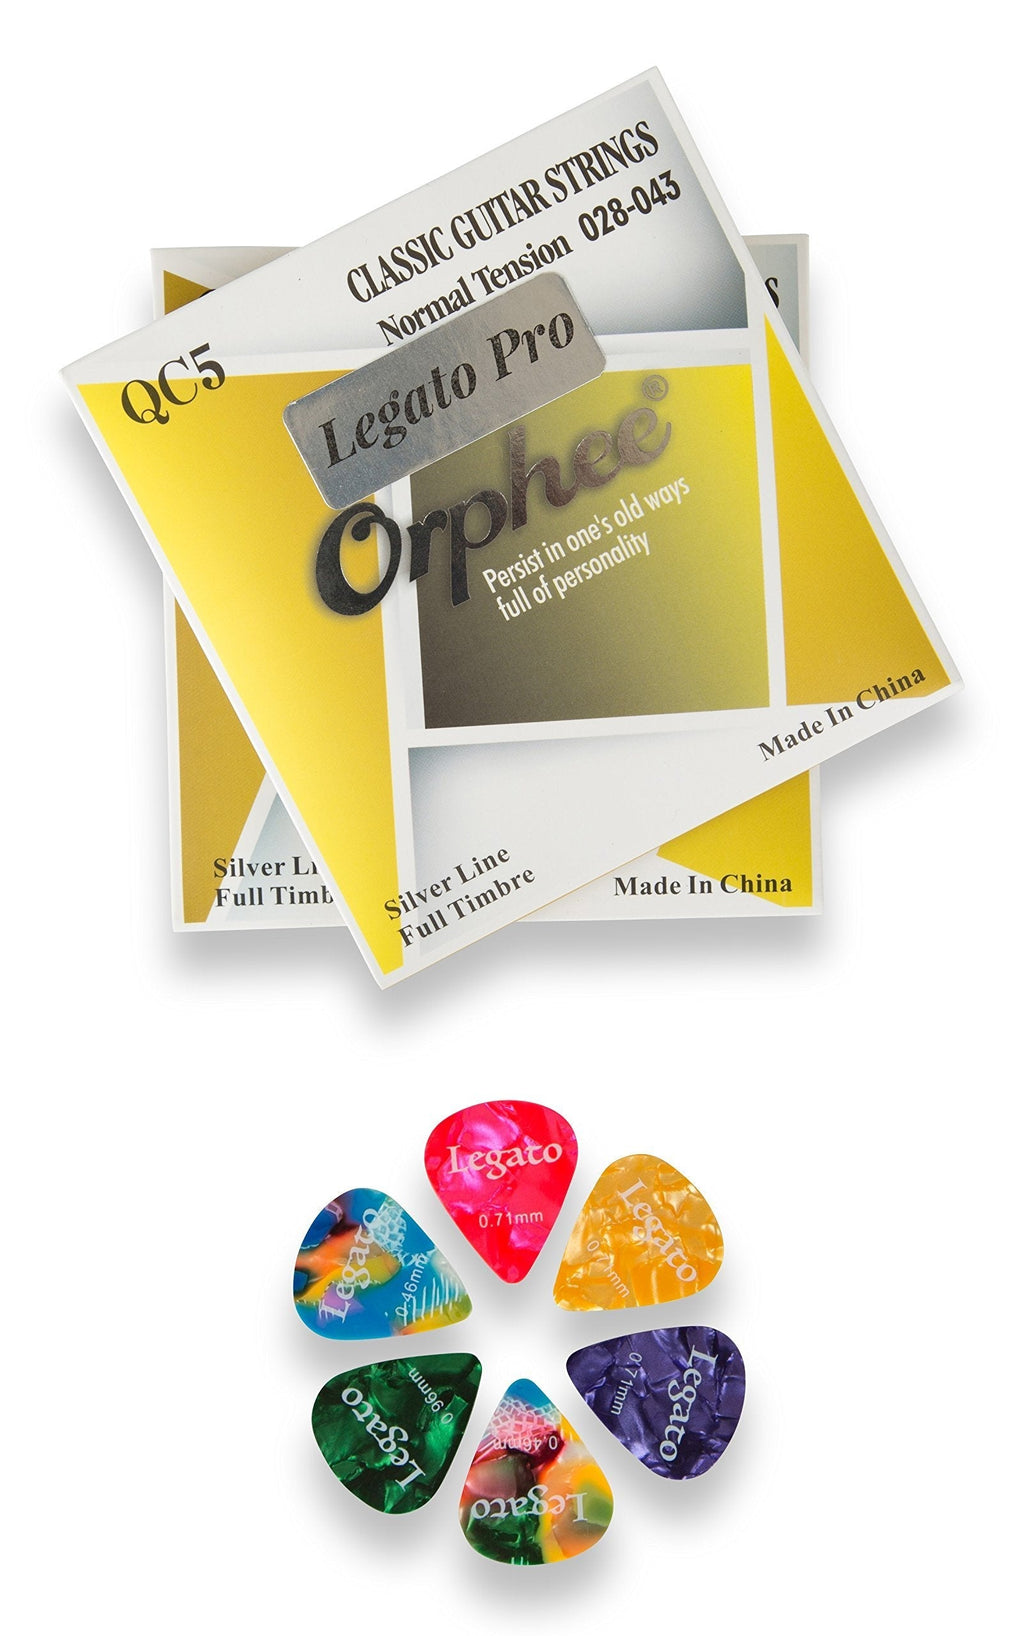 Nylon Classical Acoustic Guitar Strings for Beginners to Pro Level Normal Tension (2 Pack) Bundle